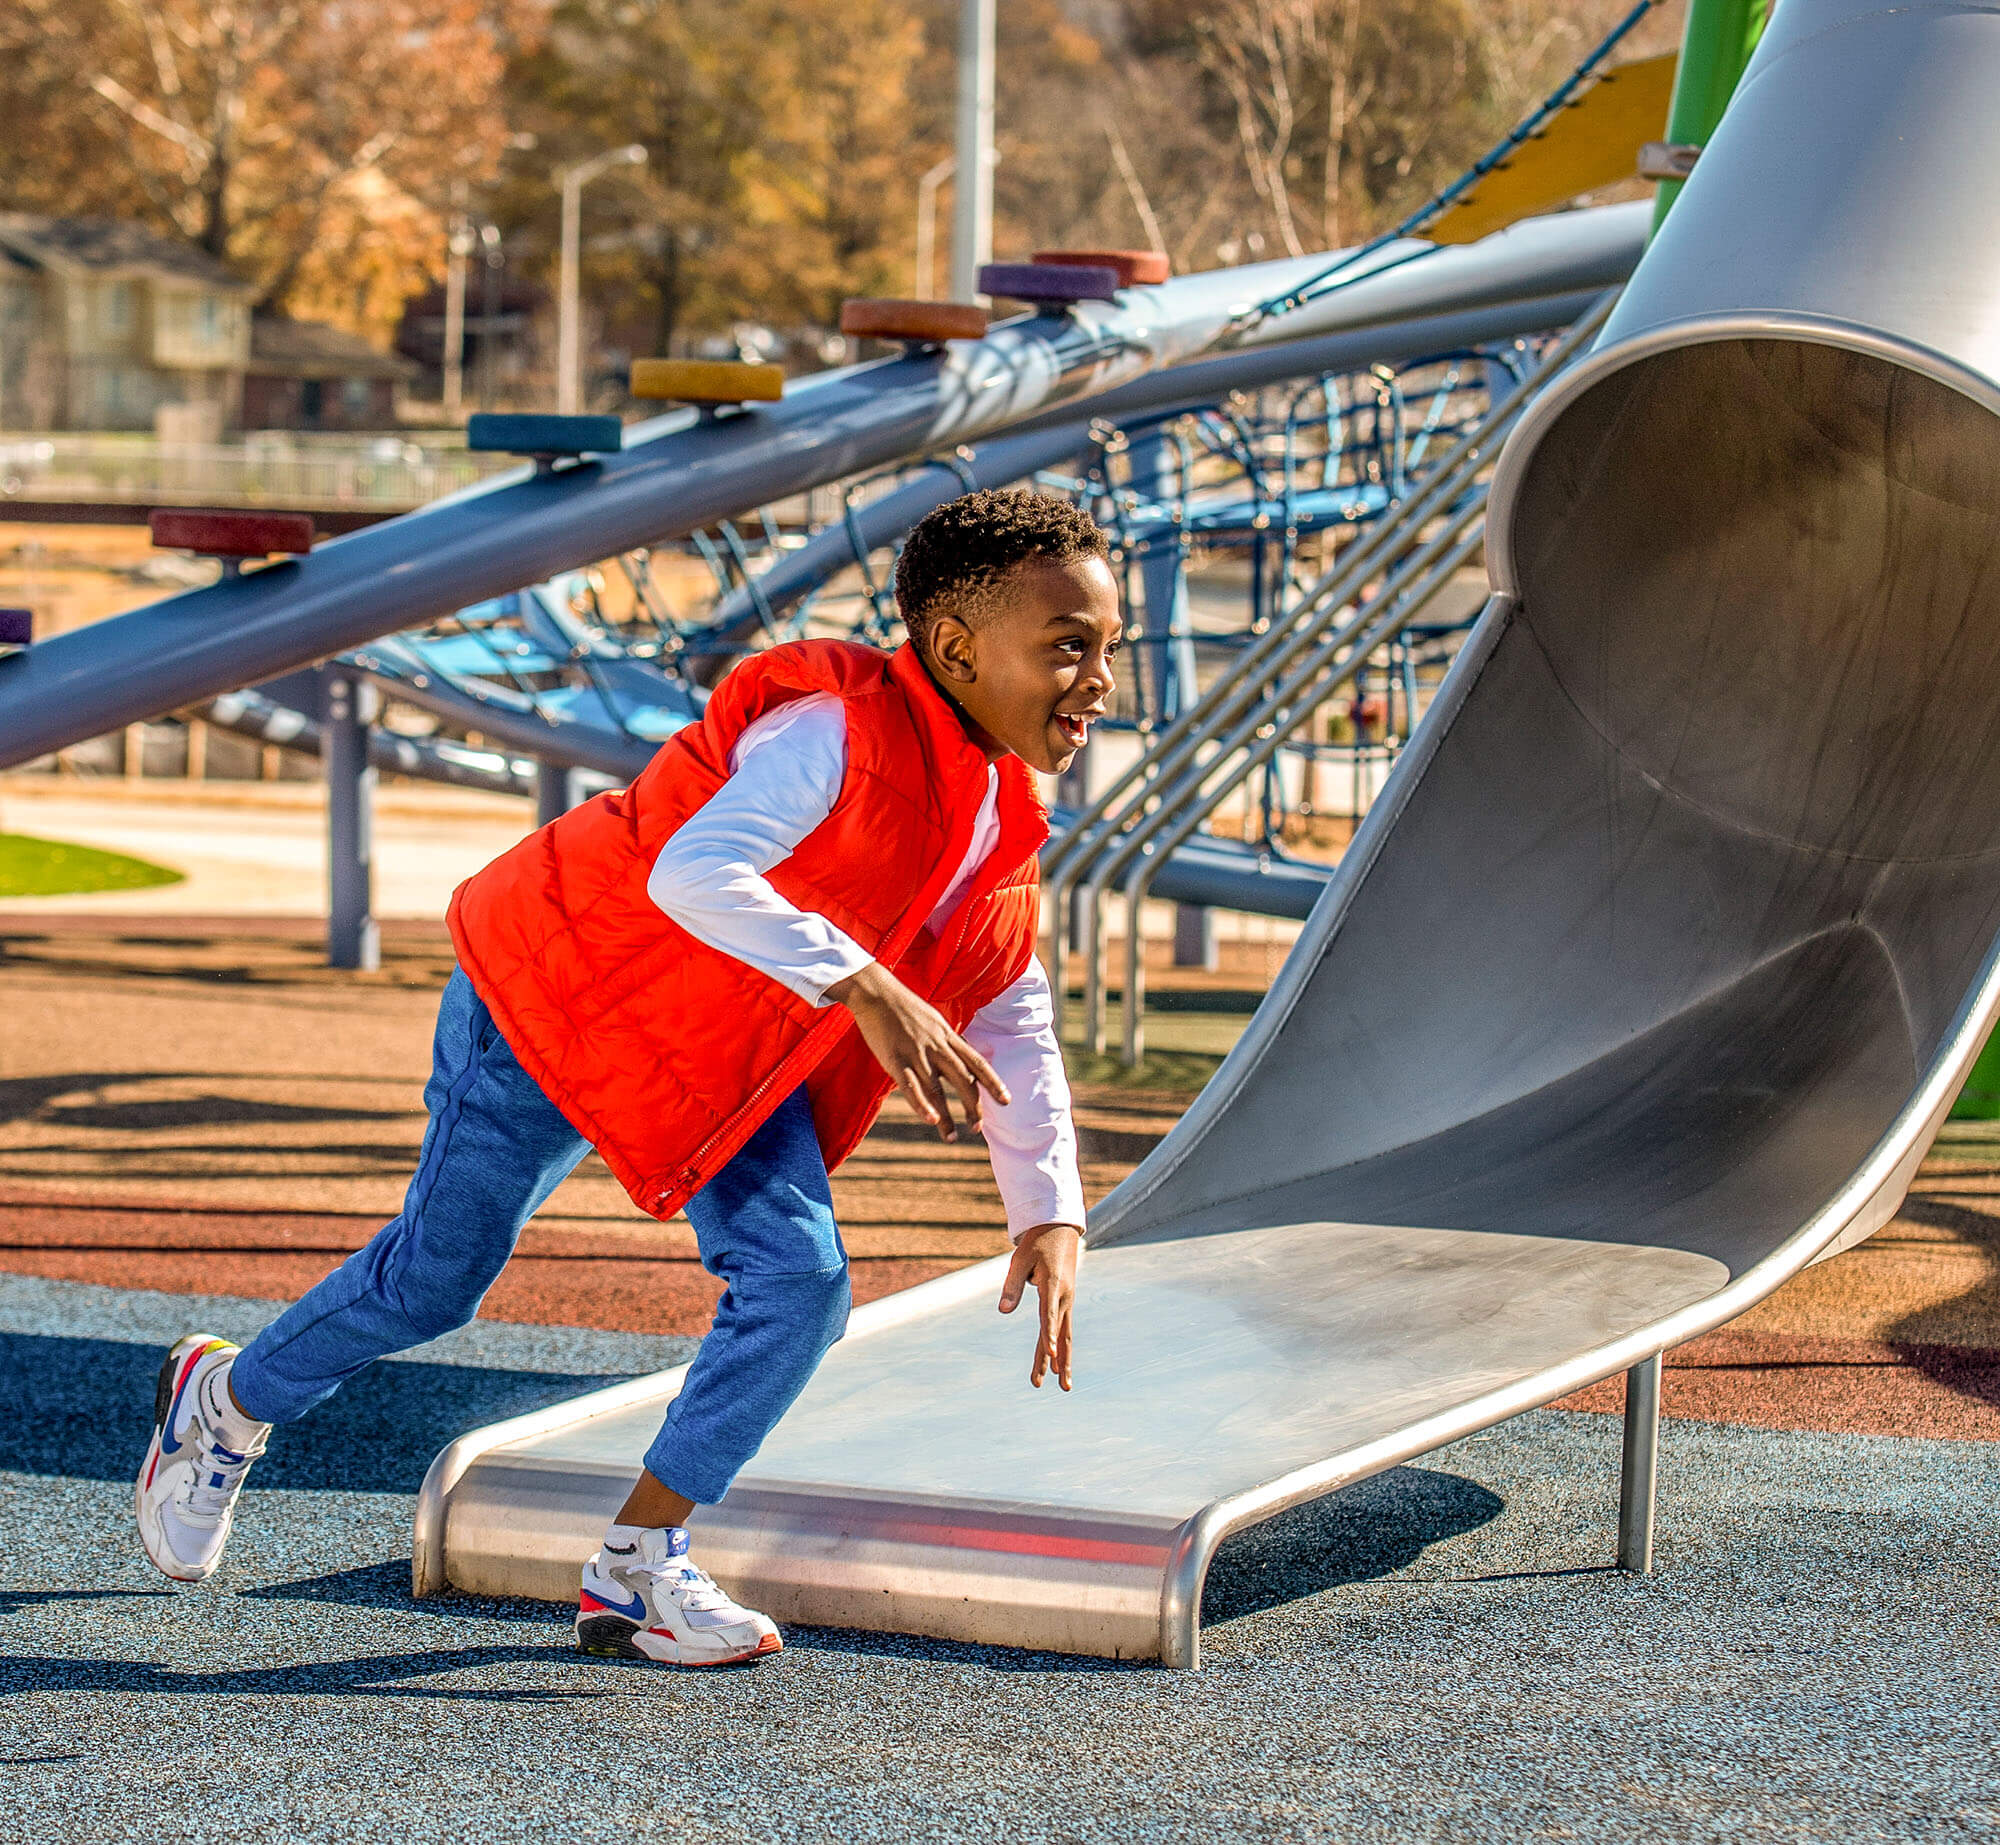 A boy is running down a slide at a playground.